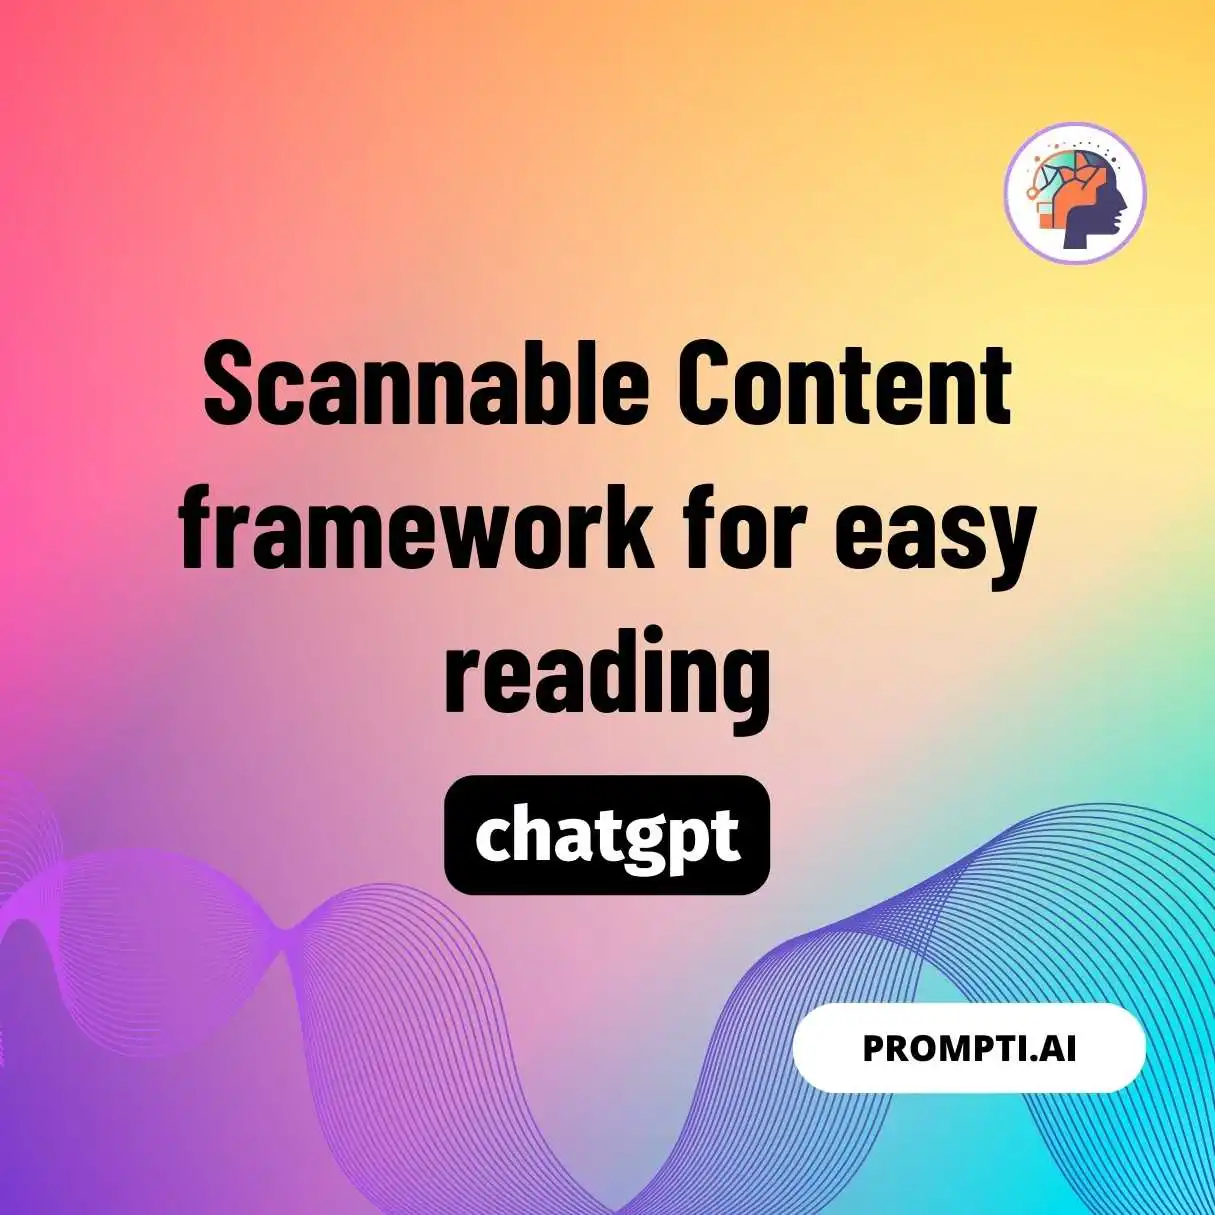 Scannable Content framework for easy reading